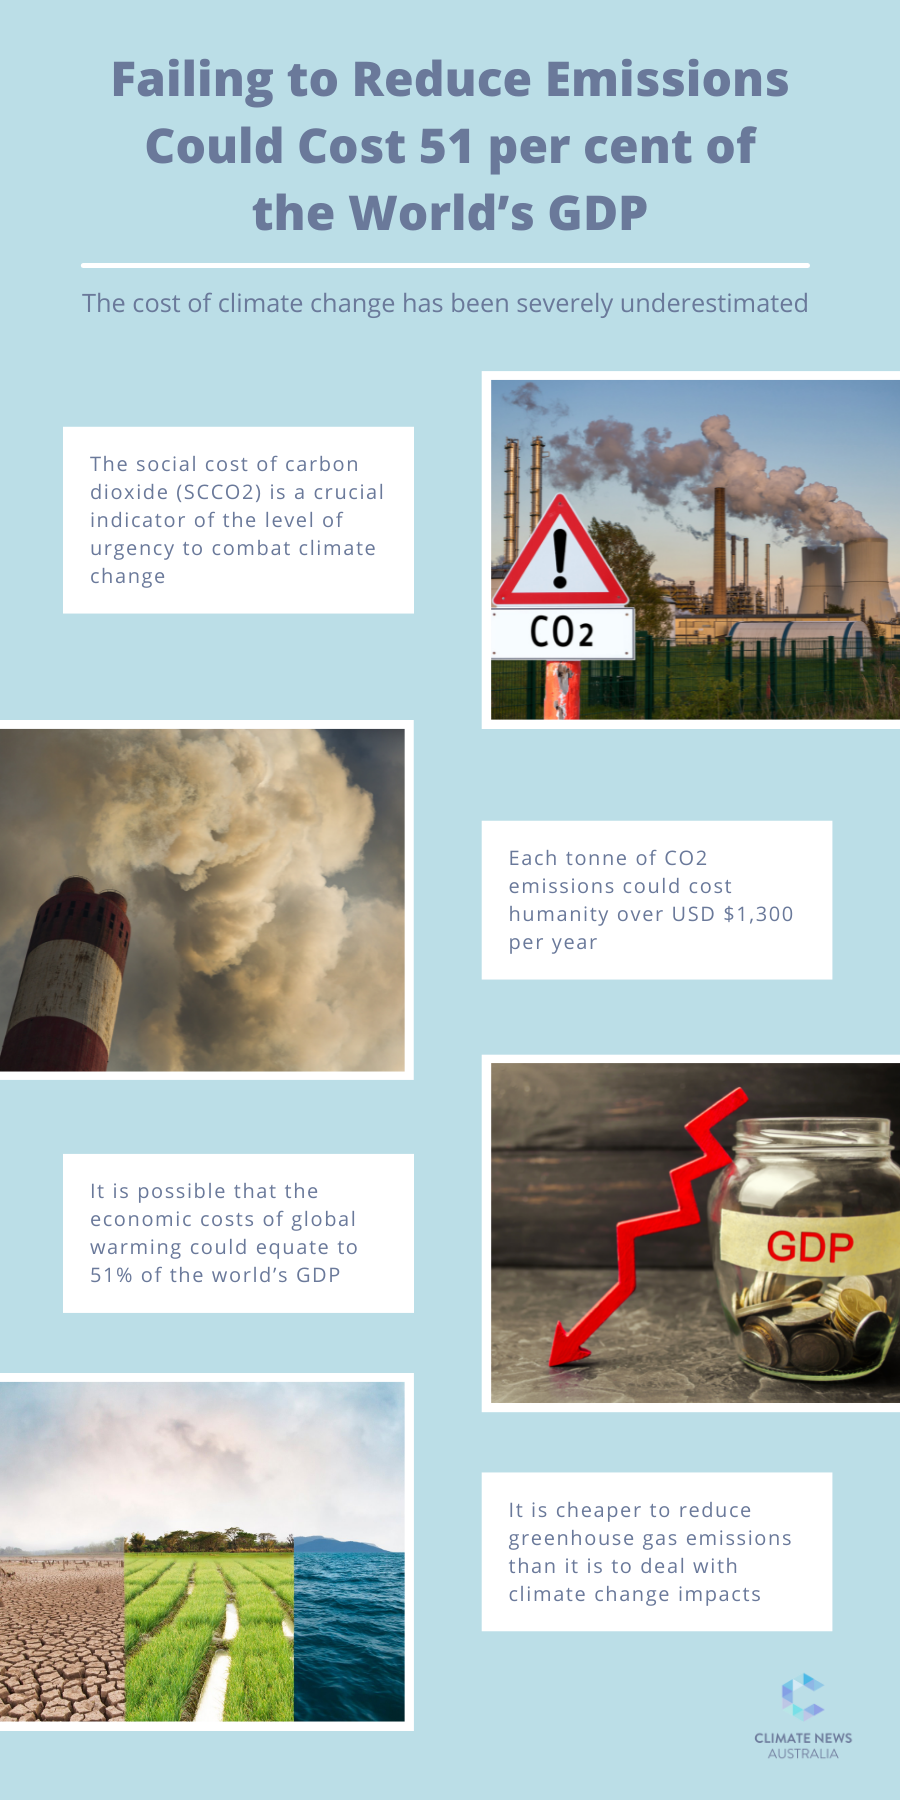 Failing to Reduce Emissions Could Cost 51 per cent of the World’s GDP